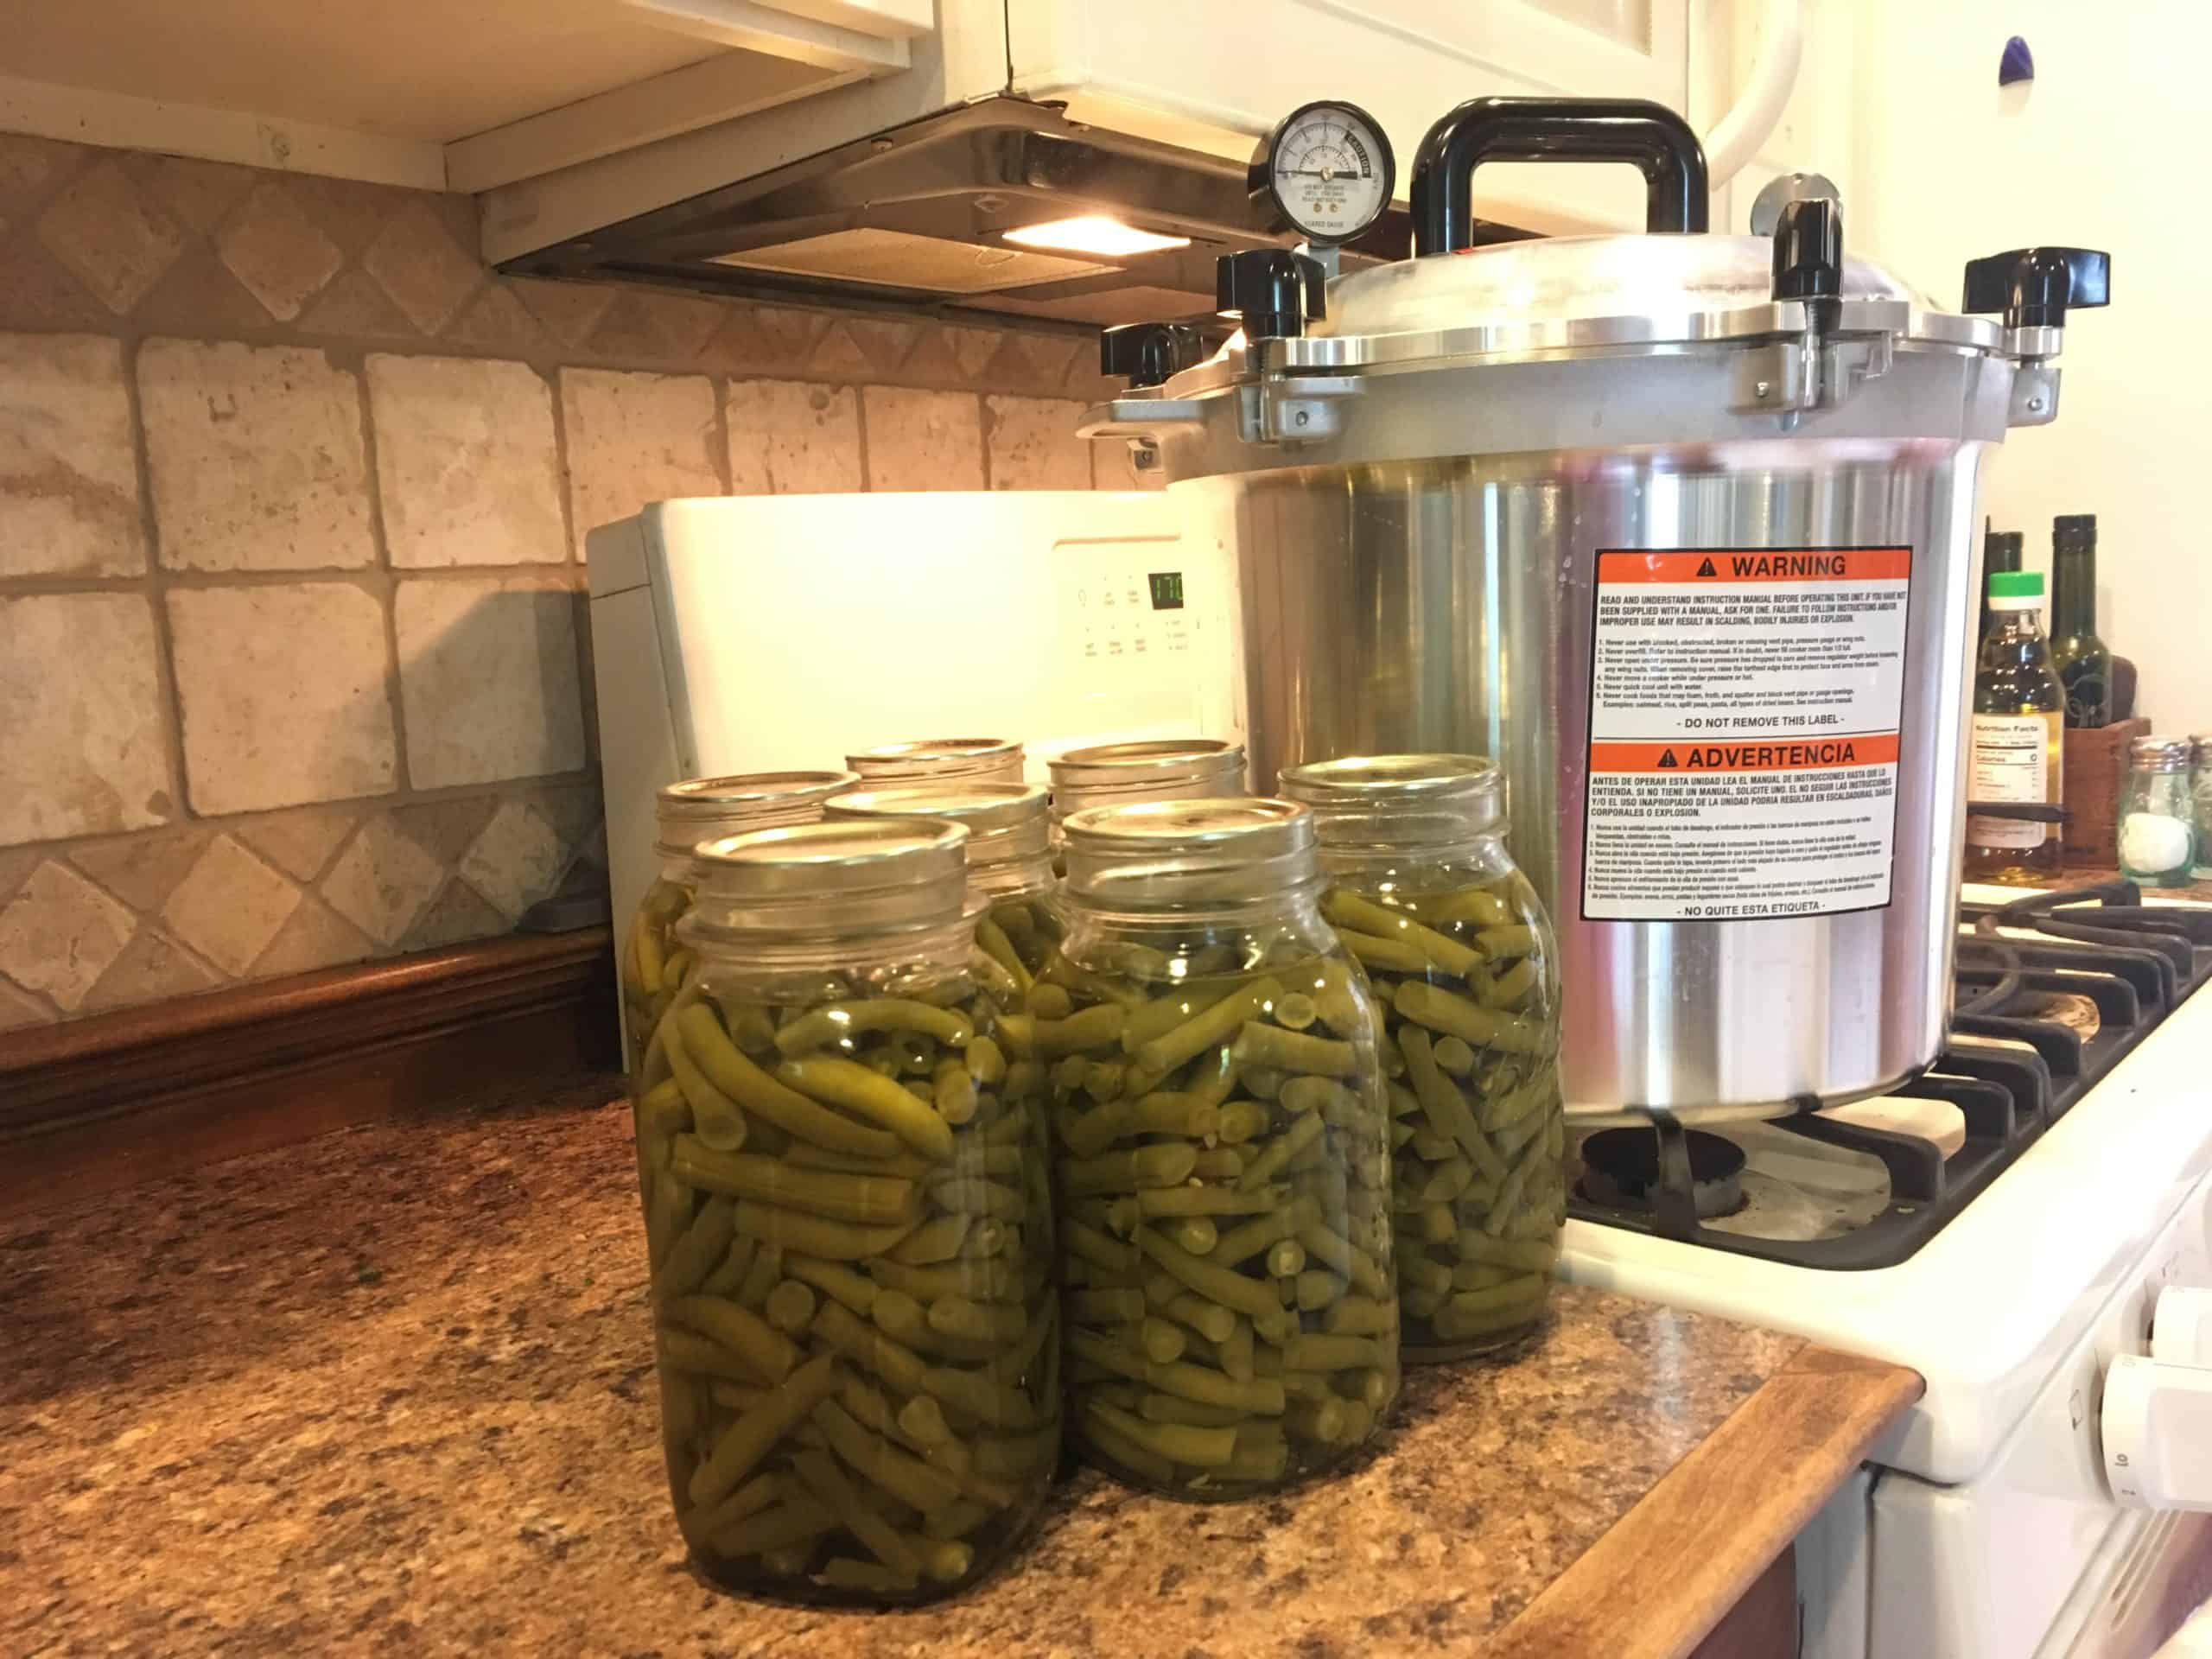 Green beans and an All-American pressure canner